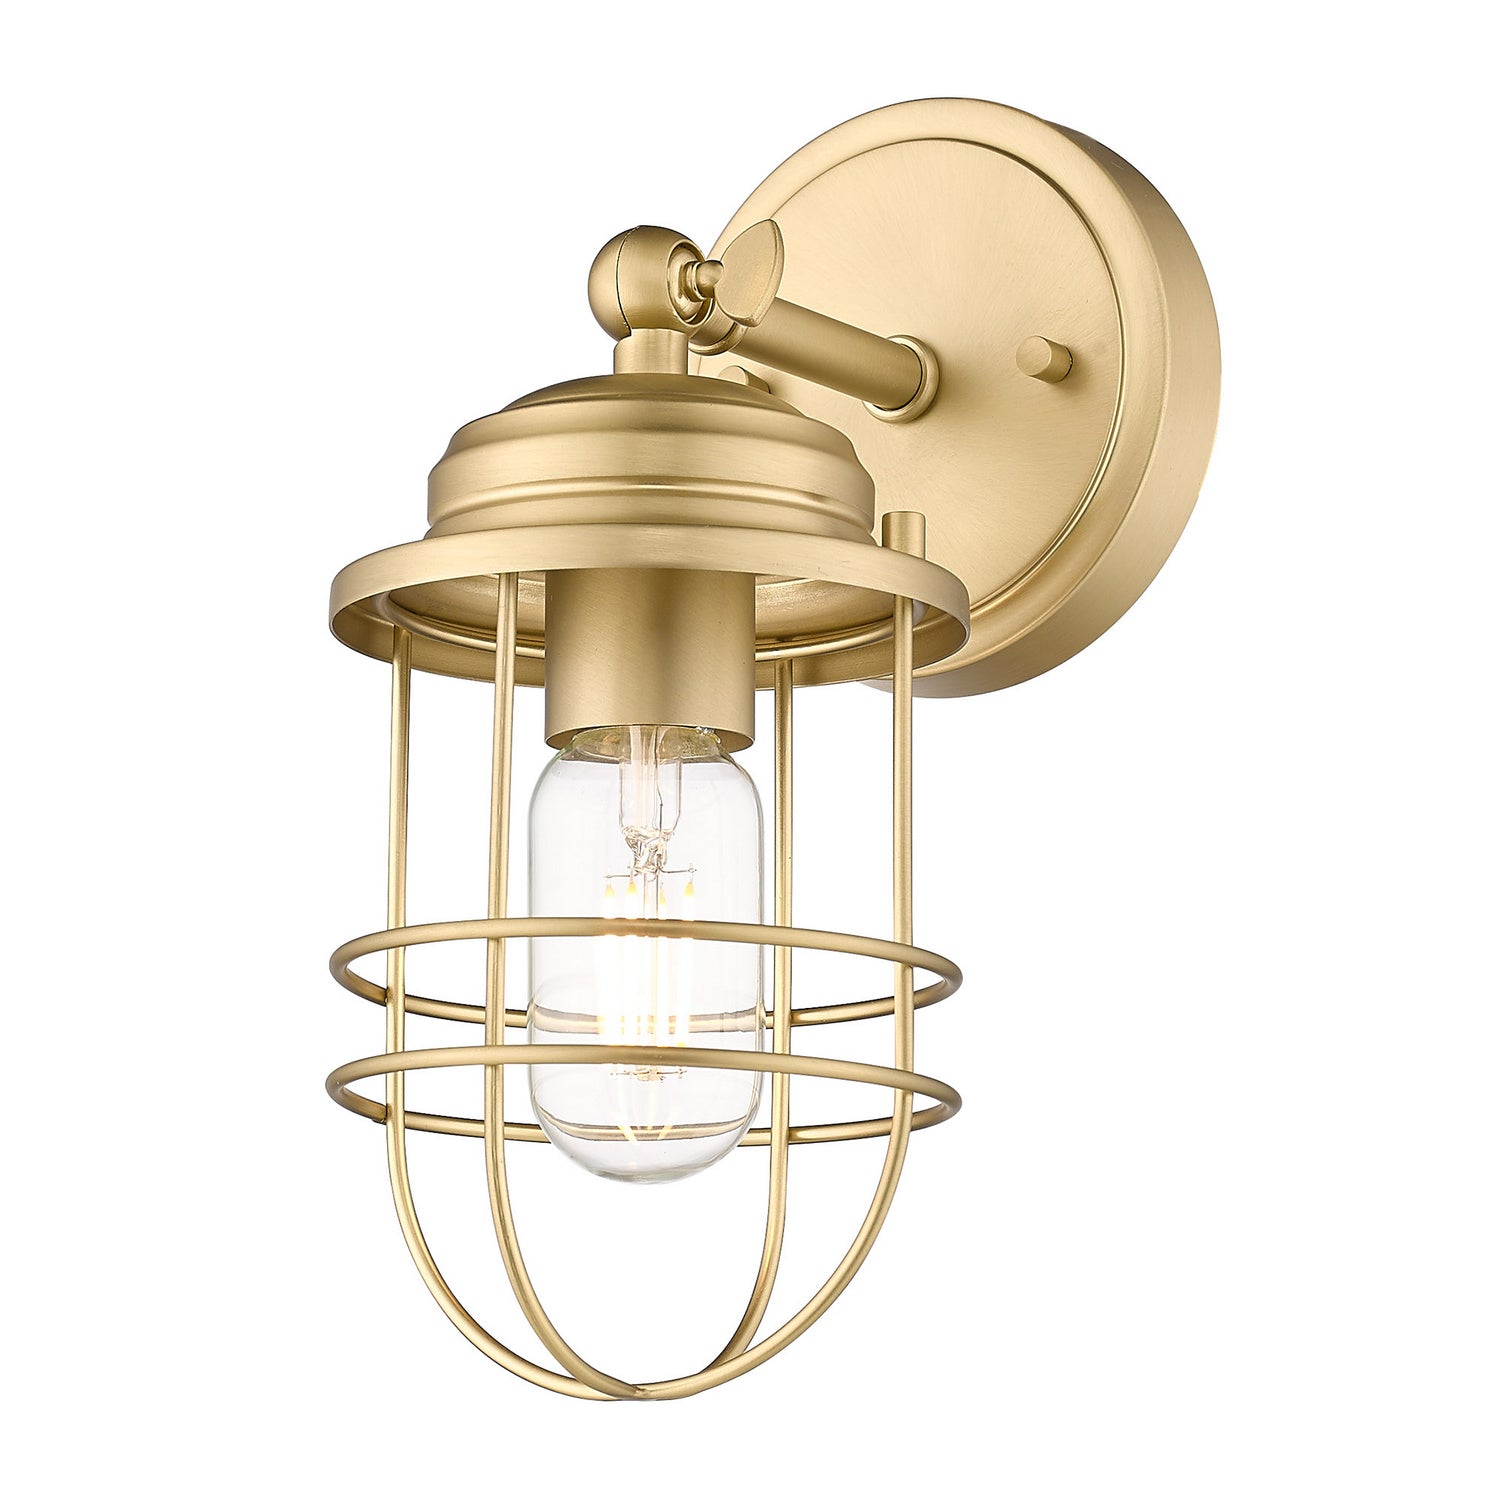 Golden - 9808-1W BCB - One Light Wall Sconce - Seaport BCB - Brushed Champagne Bronze